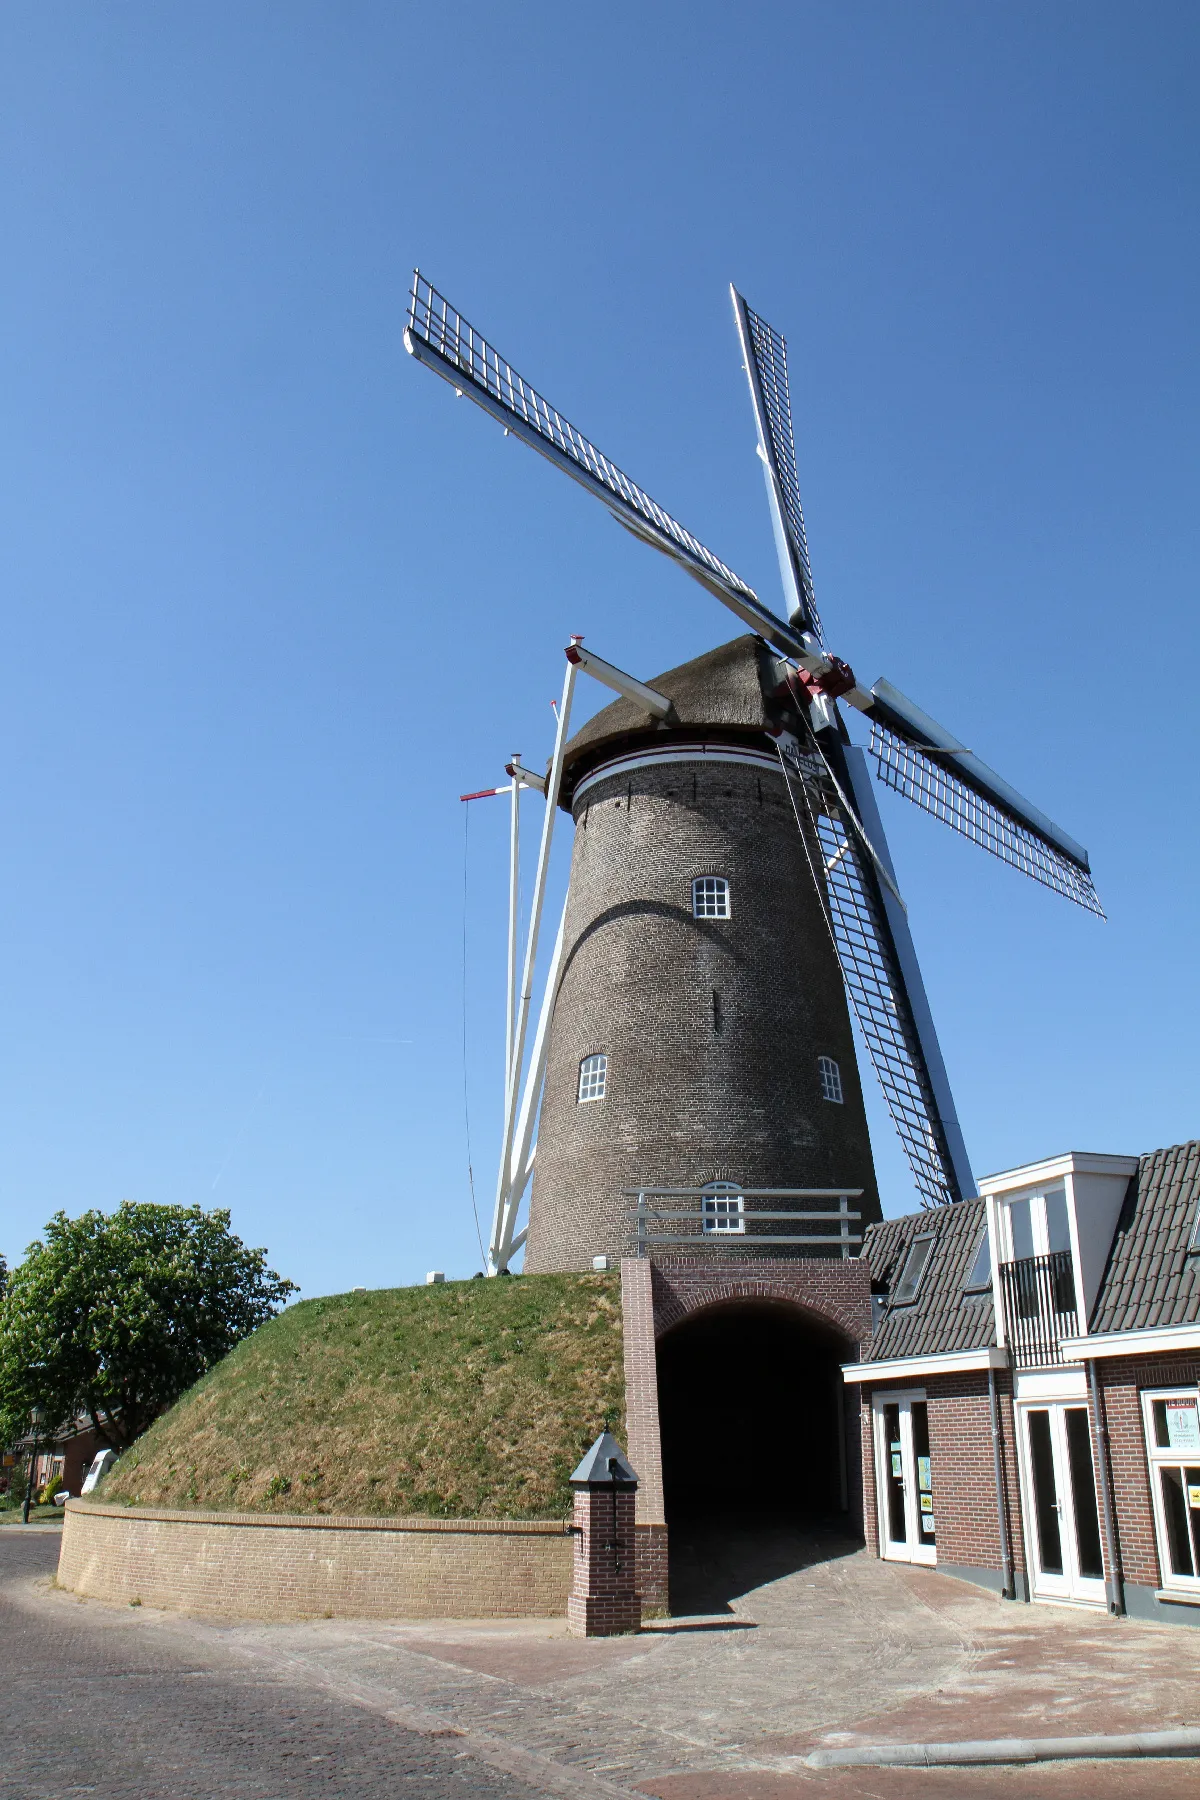 Photo showing: en:Amerongen: Windmill Maallust. The name can be translated both as Lust of Milling and Lust at Milling. This round brick en:gristmill was built in 1830. From 2007 tot 2009, this beltmolen (mill on a mound or hill) was restored and partially rebuilt from a state of disrepair, after being relocated over 17 meters. After the restoration it is used again for grinding flour, albeit on a small scale. The mill is at the Molenstraat, the houses are at the Burgemeester Jonkheer H. van den Boschstraat. Their low en:gambrels are designed to provide a free windflow to the mill.